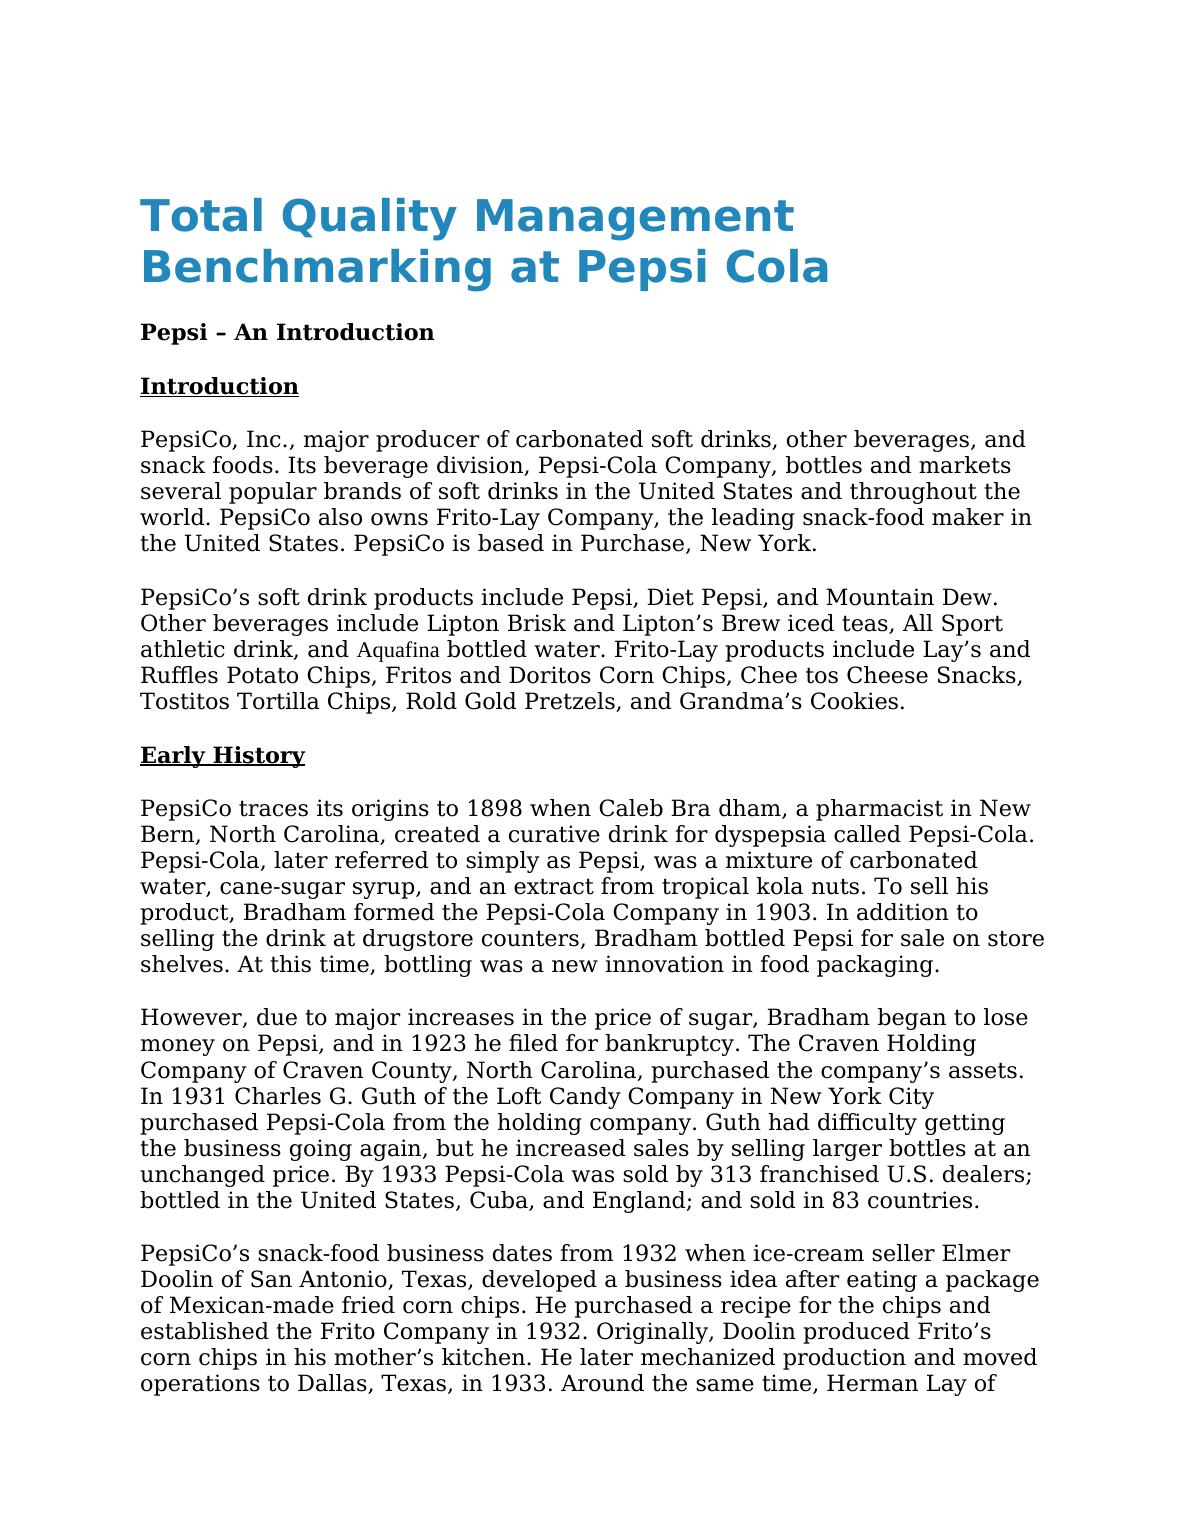 Total Quality Management Benchmarking at Pepsi Cola PDF_1